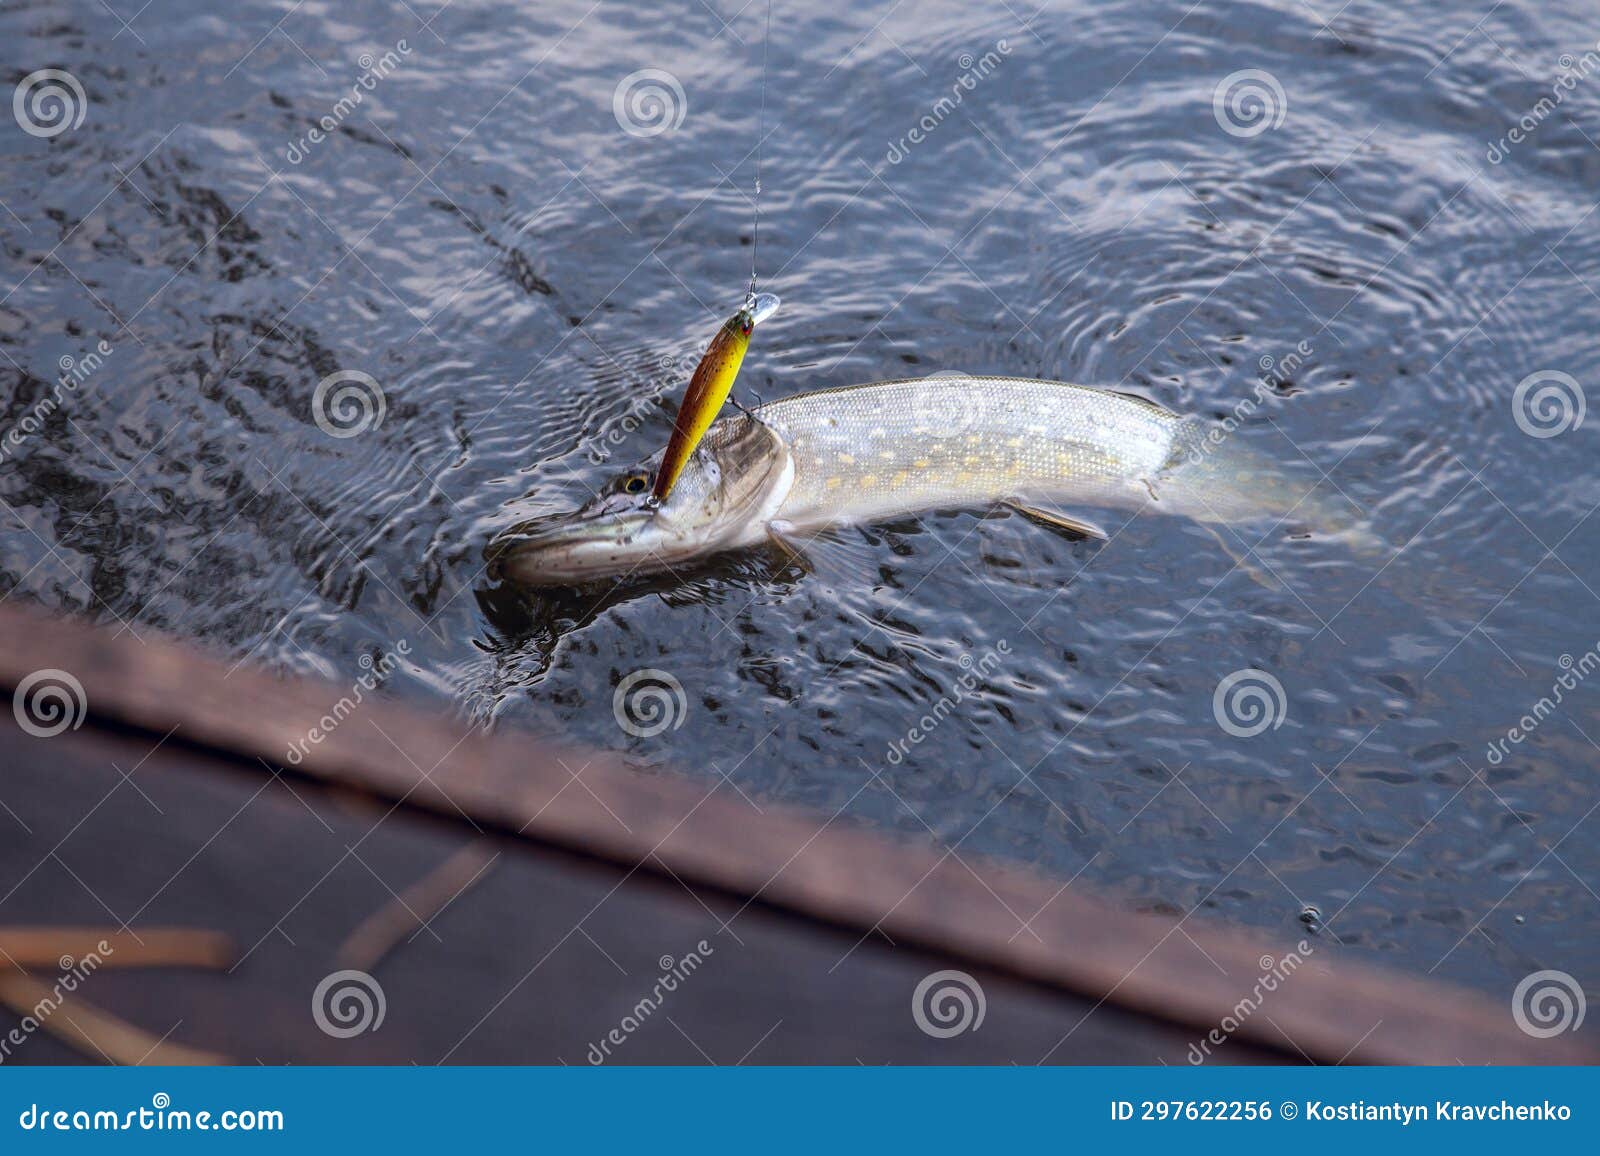 Freshwater Pike Fish. Just Caught Freshwater Fish Northern Pike in Pound  Water Stock Photo - Image of season, outdoor: 297622256